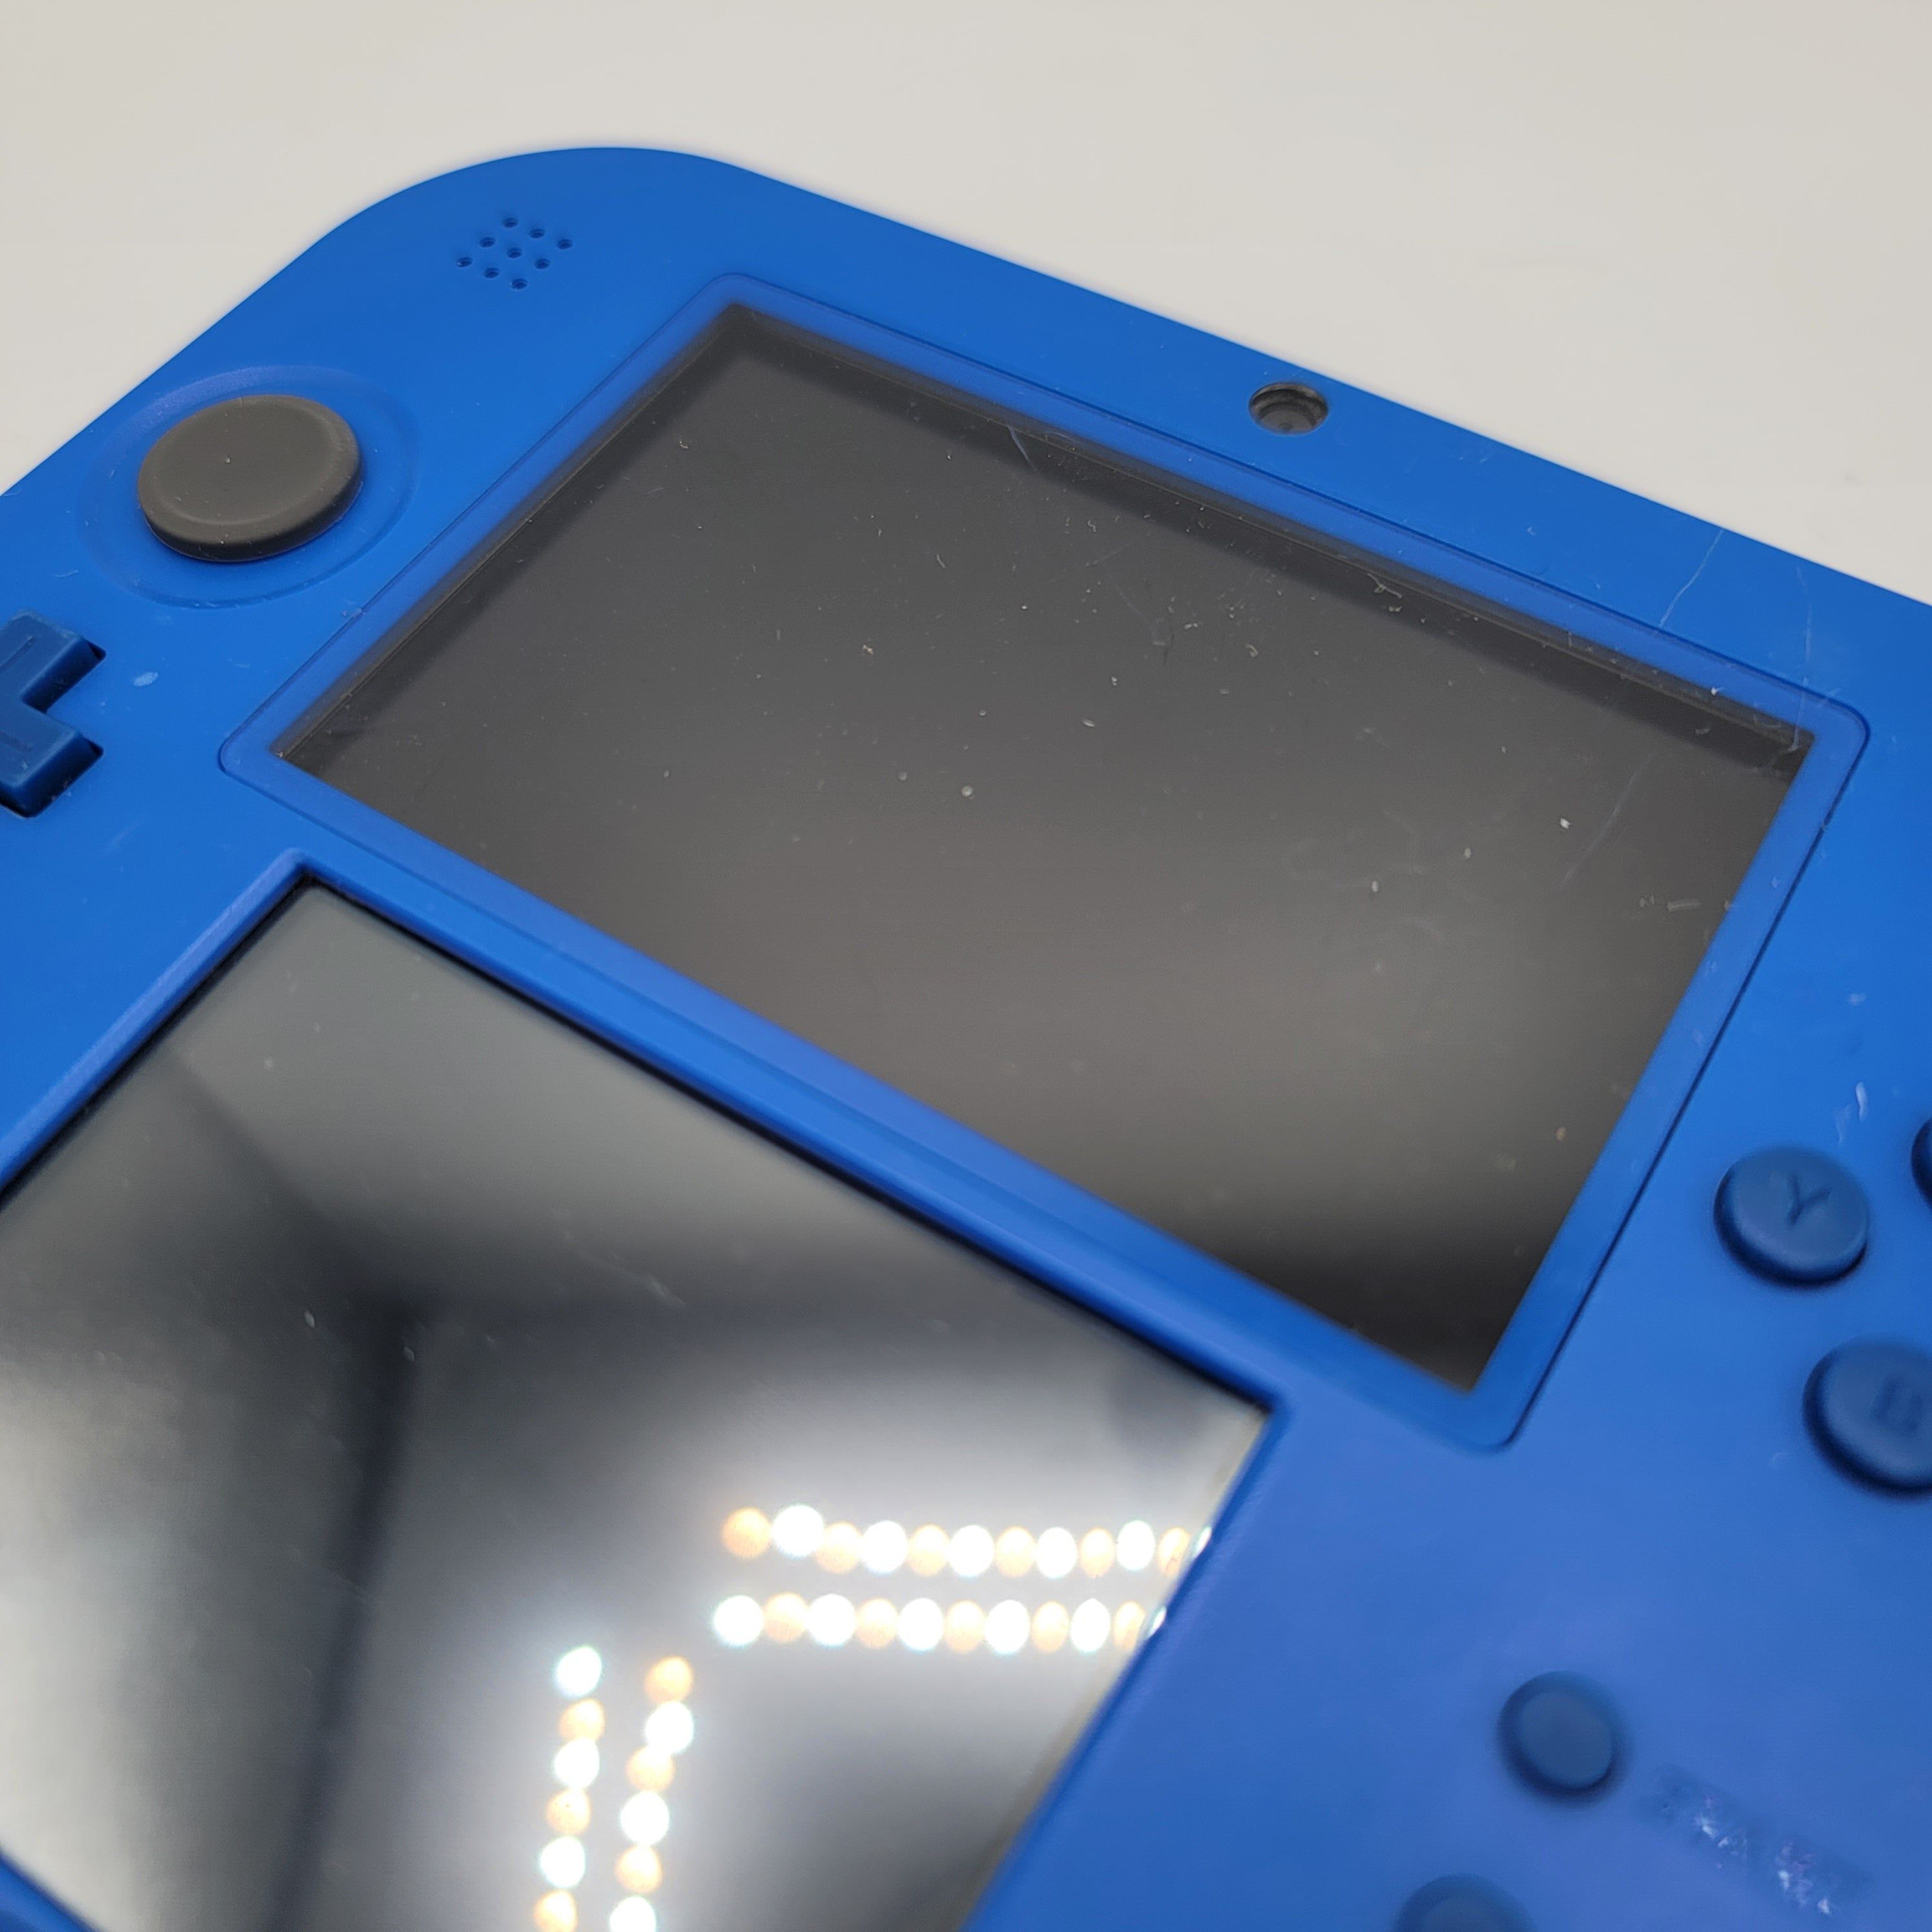 2DS System (Blue / Reduced)